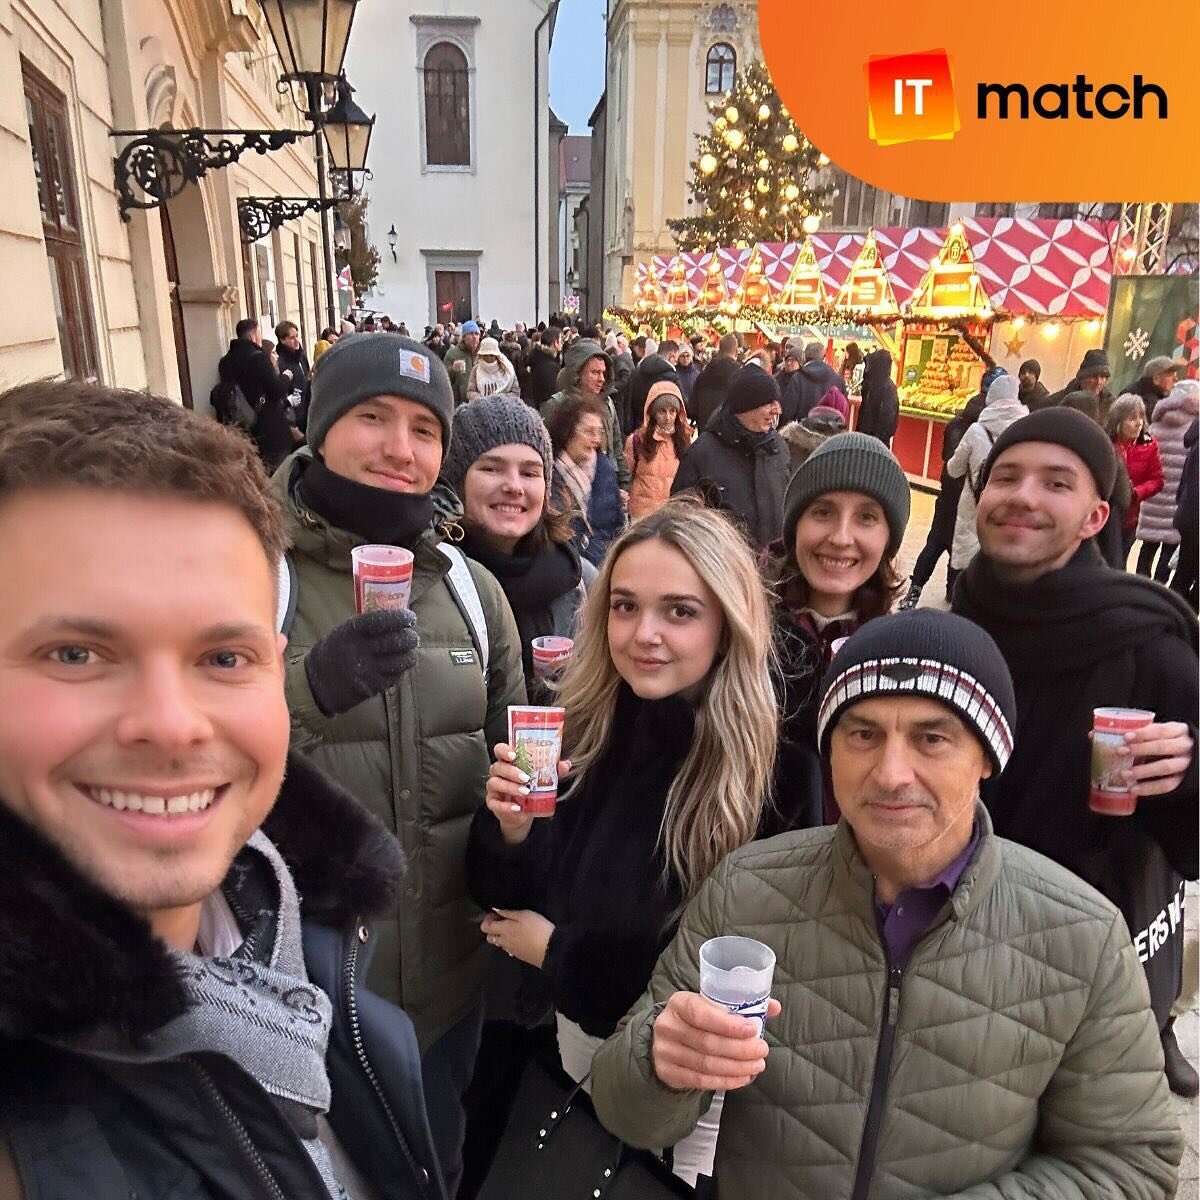 The ITmatch team embraced the Christmas spirit at the Bratislava Christmas markets! 🎄⛄️ Ready to join us in welcoming the festive magic?
#christmas #bratislava #team